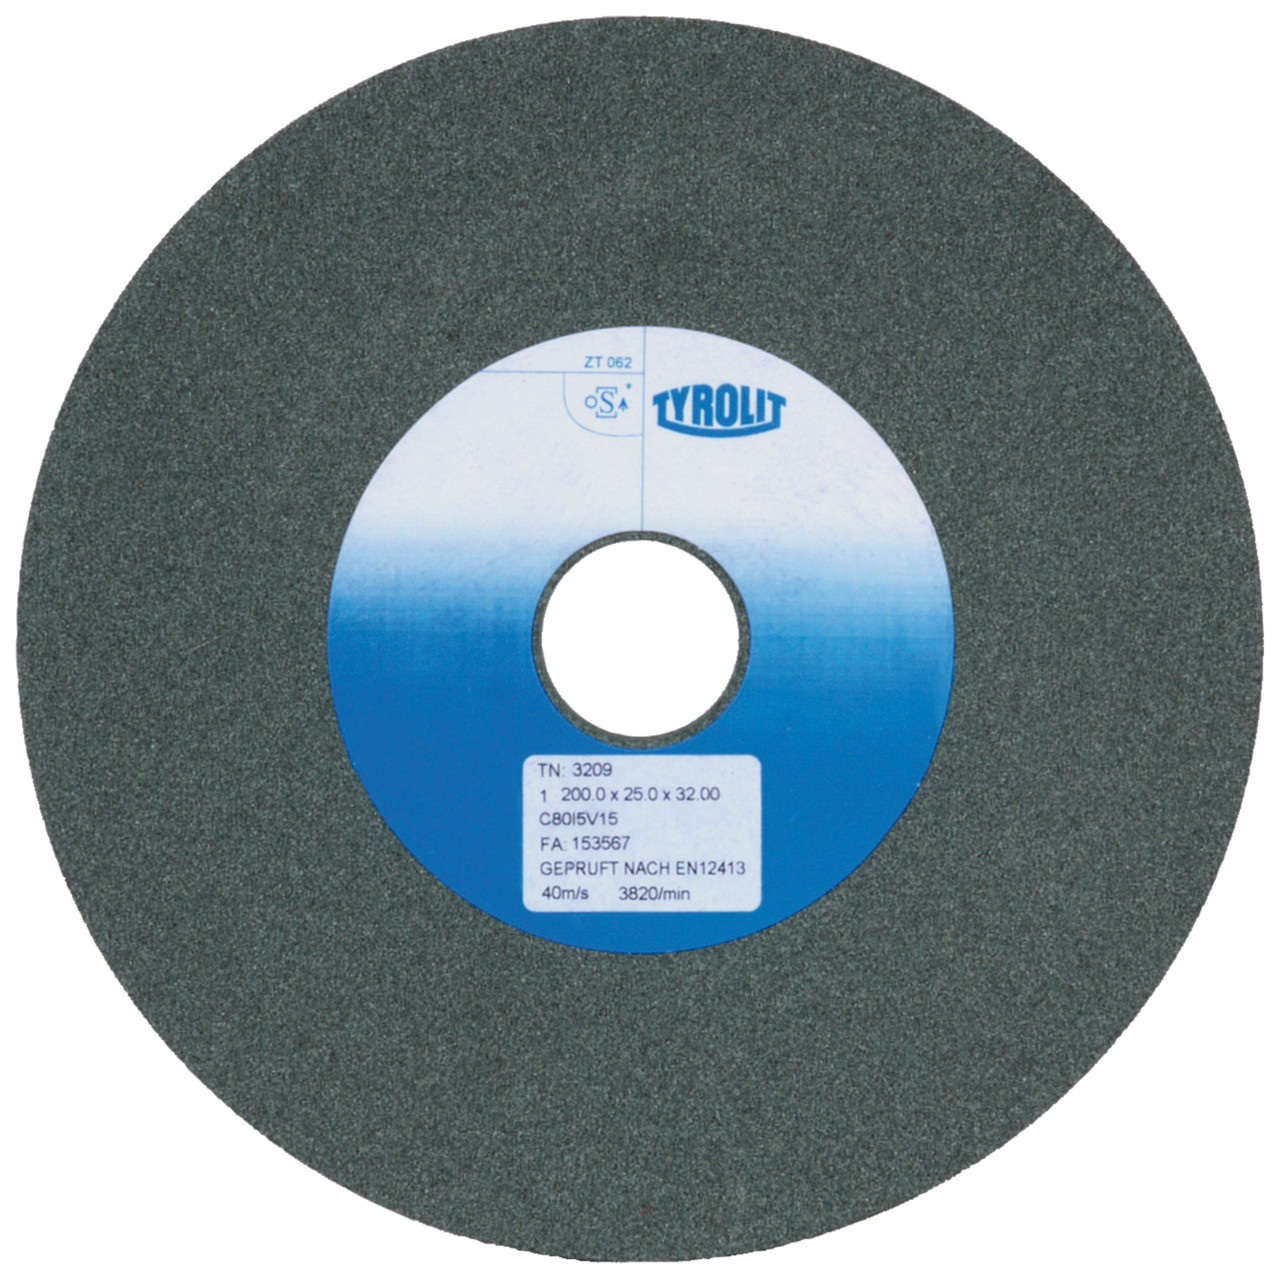 TYROLIT conventional ceramic grinding wheels DxDxH 200x25x32 For carbide and cast iron, shape: 1, Art. 3206